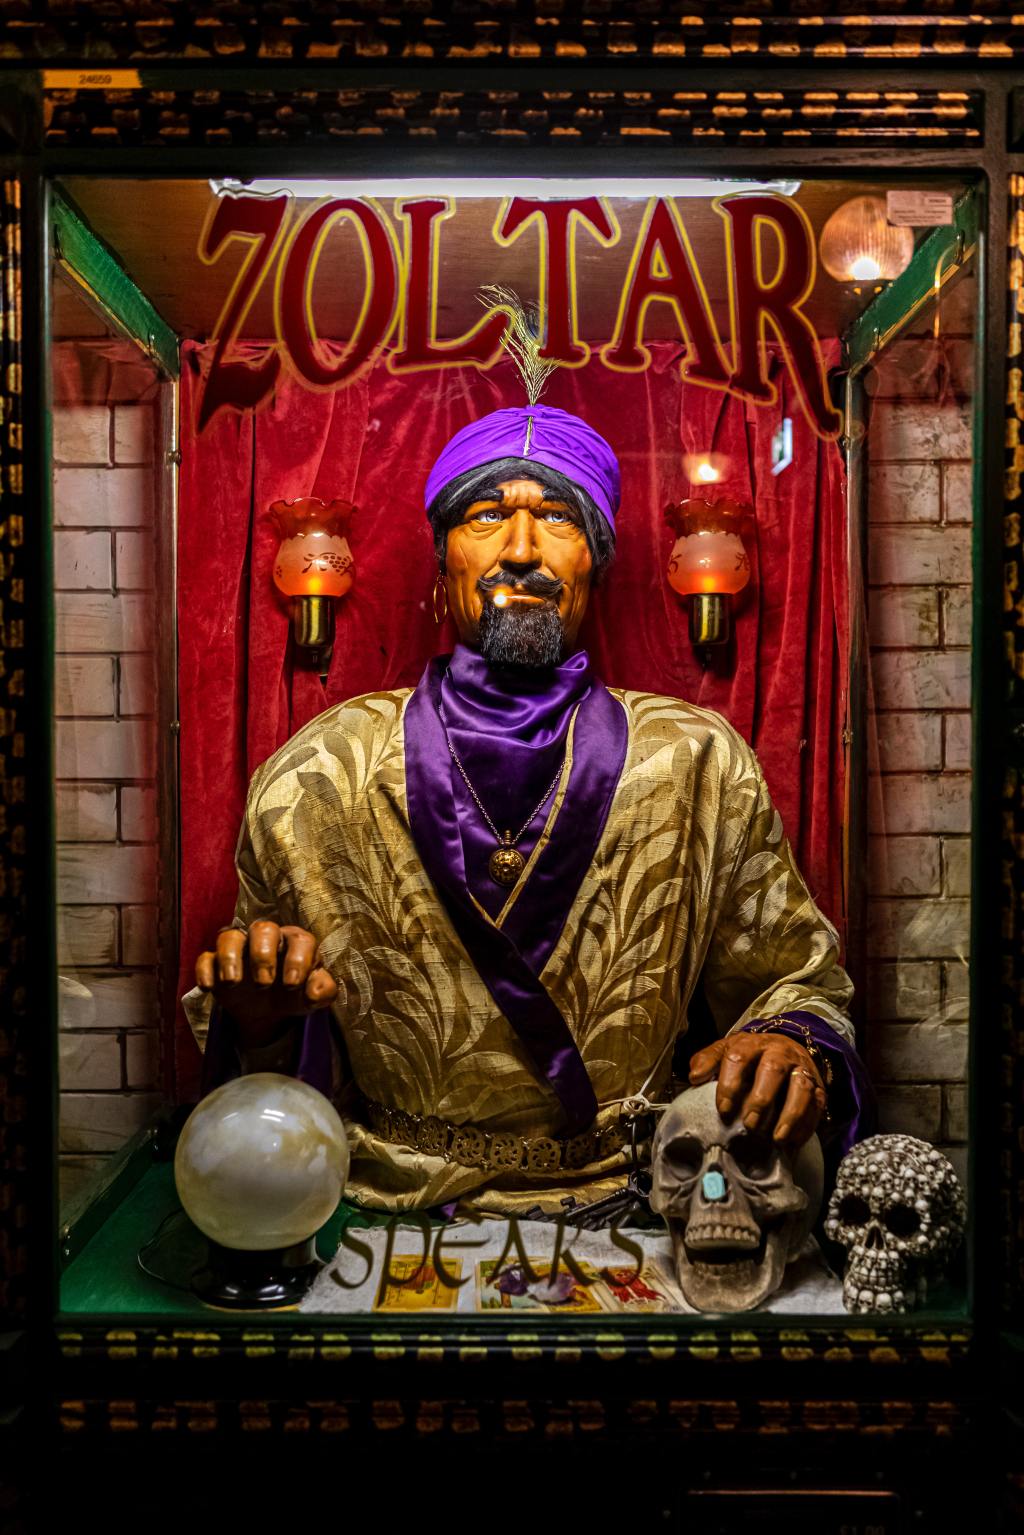 Hear Your Fortune From Zoltar!